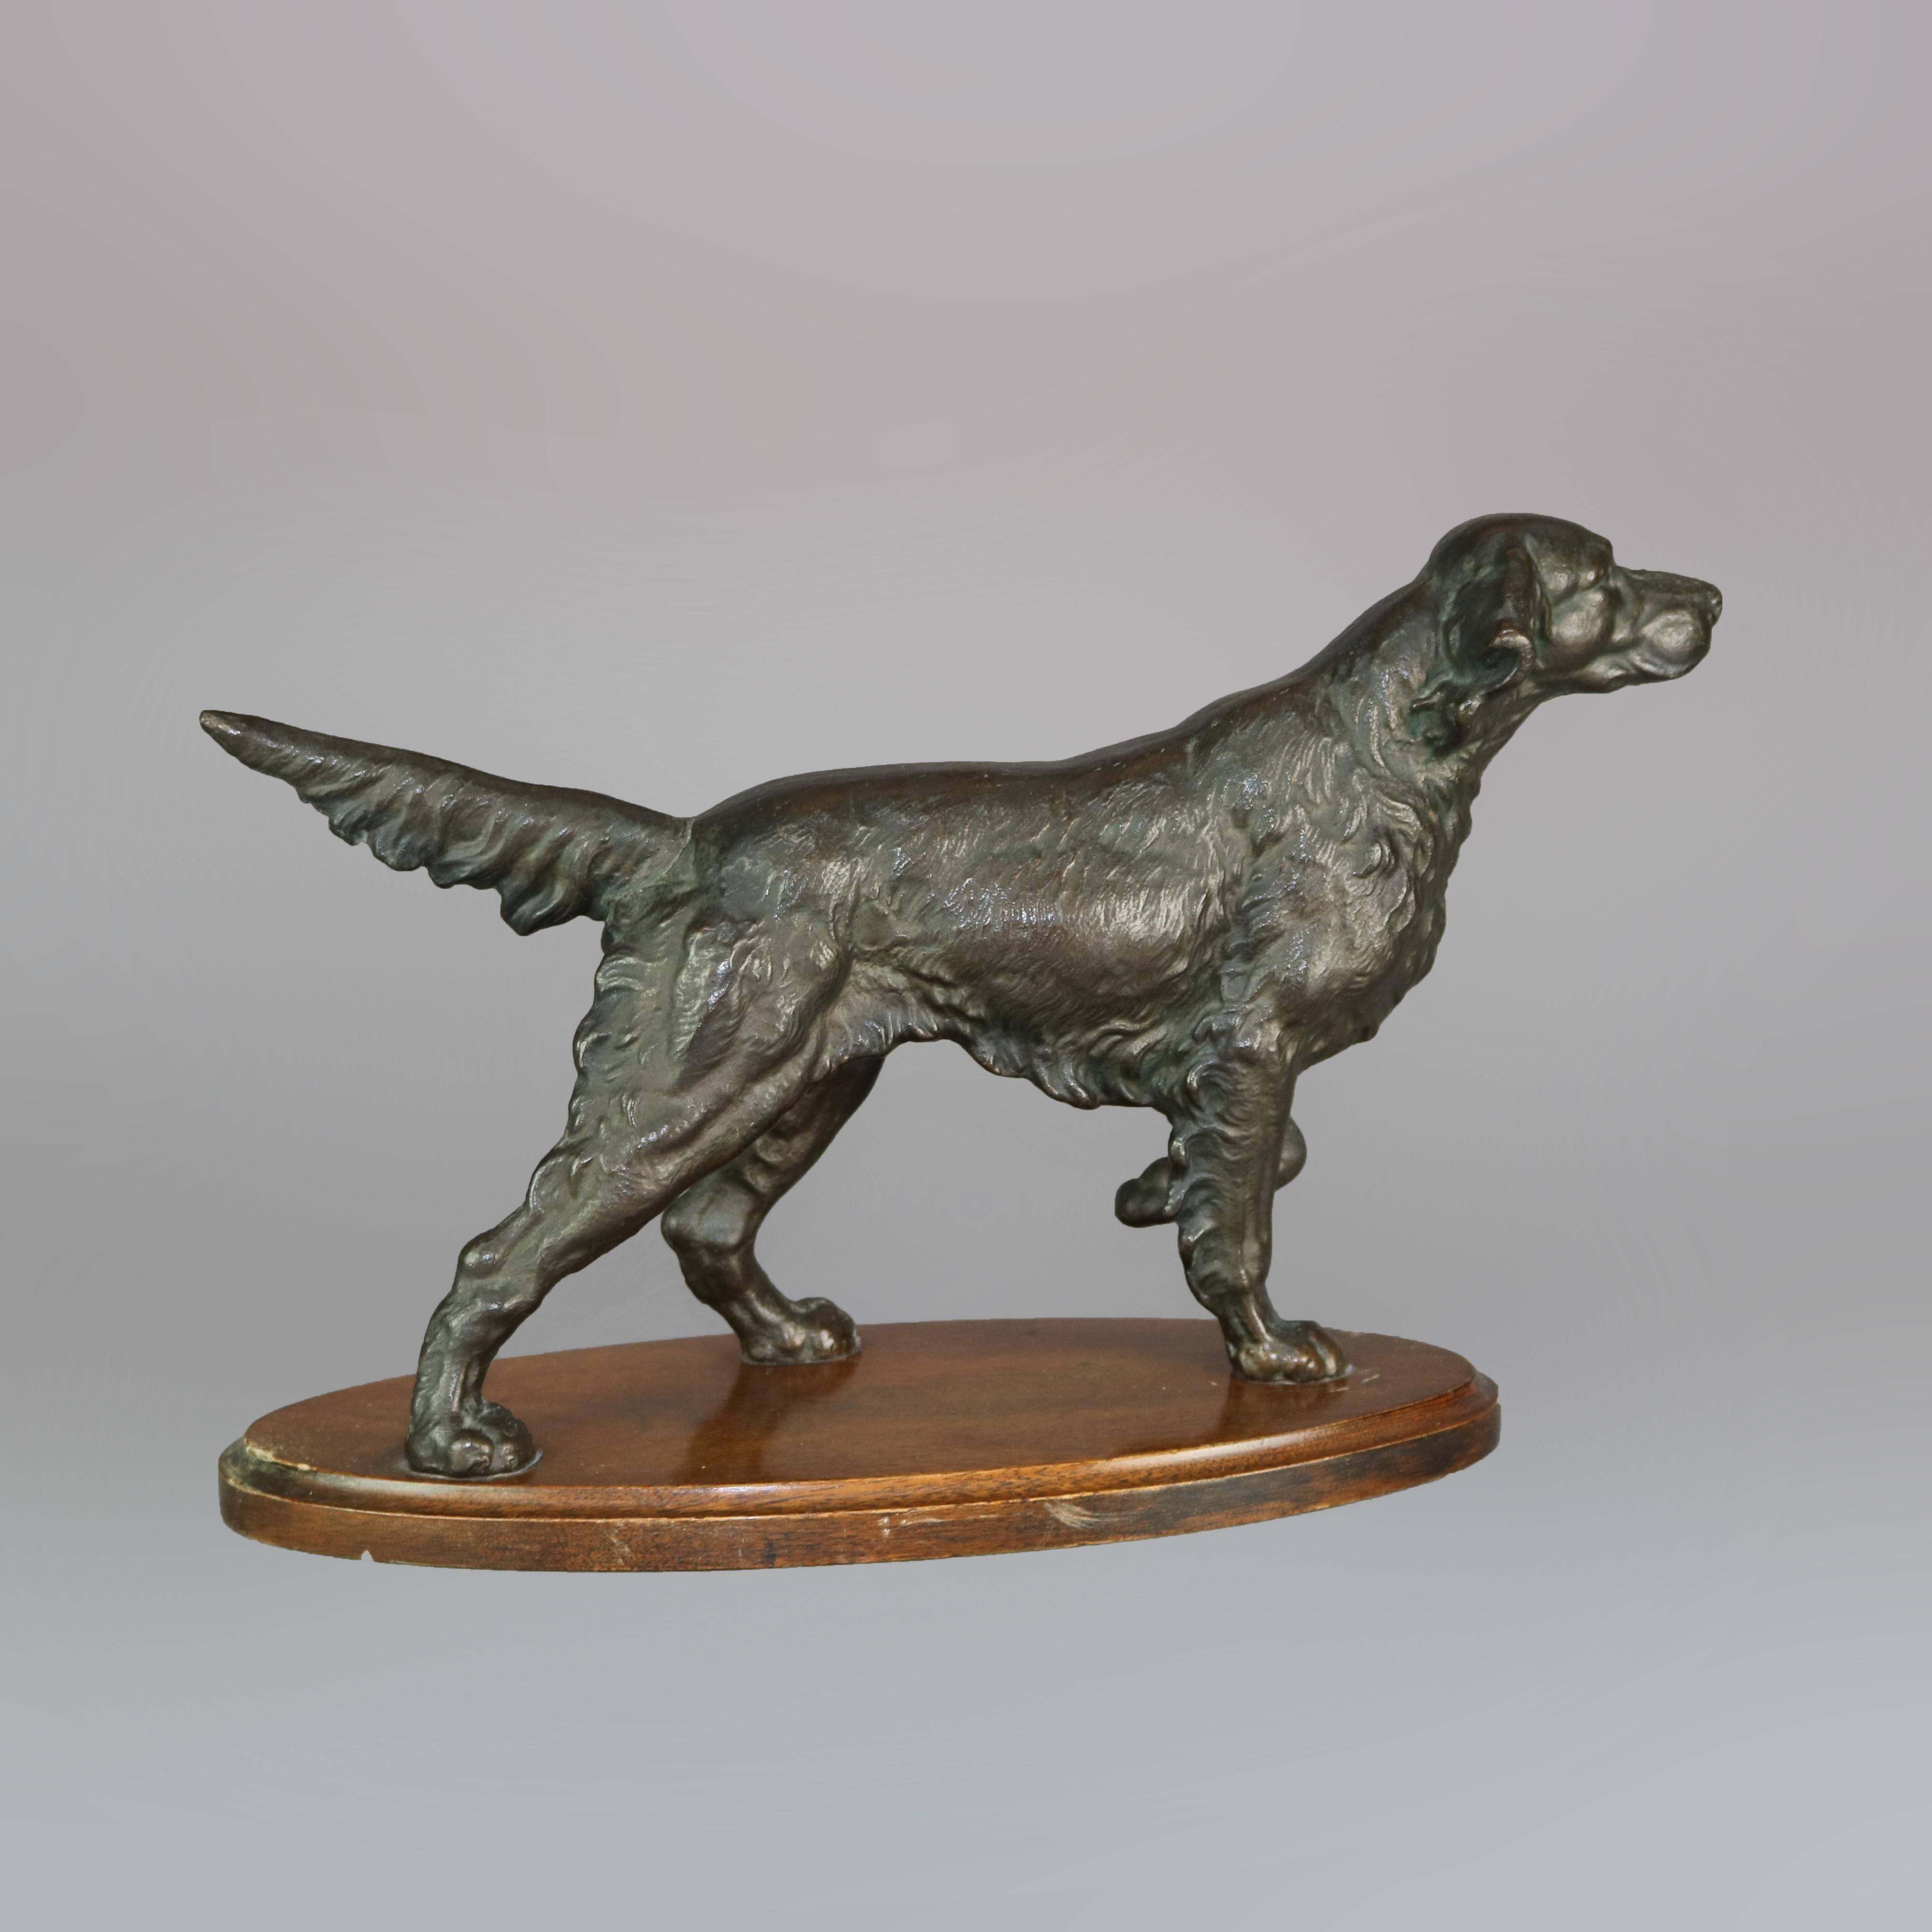 An antique and large cast bronze sculpture depicts Irish Setter (bird dog) in point, mounted on mahogany base, c1920

Measure: 9.5